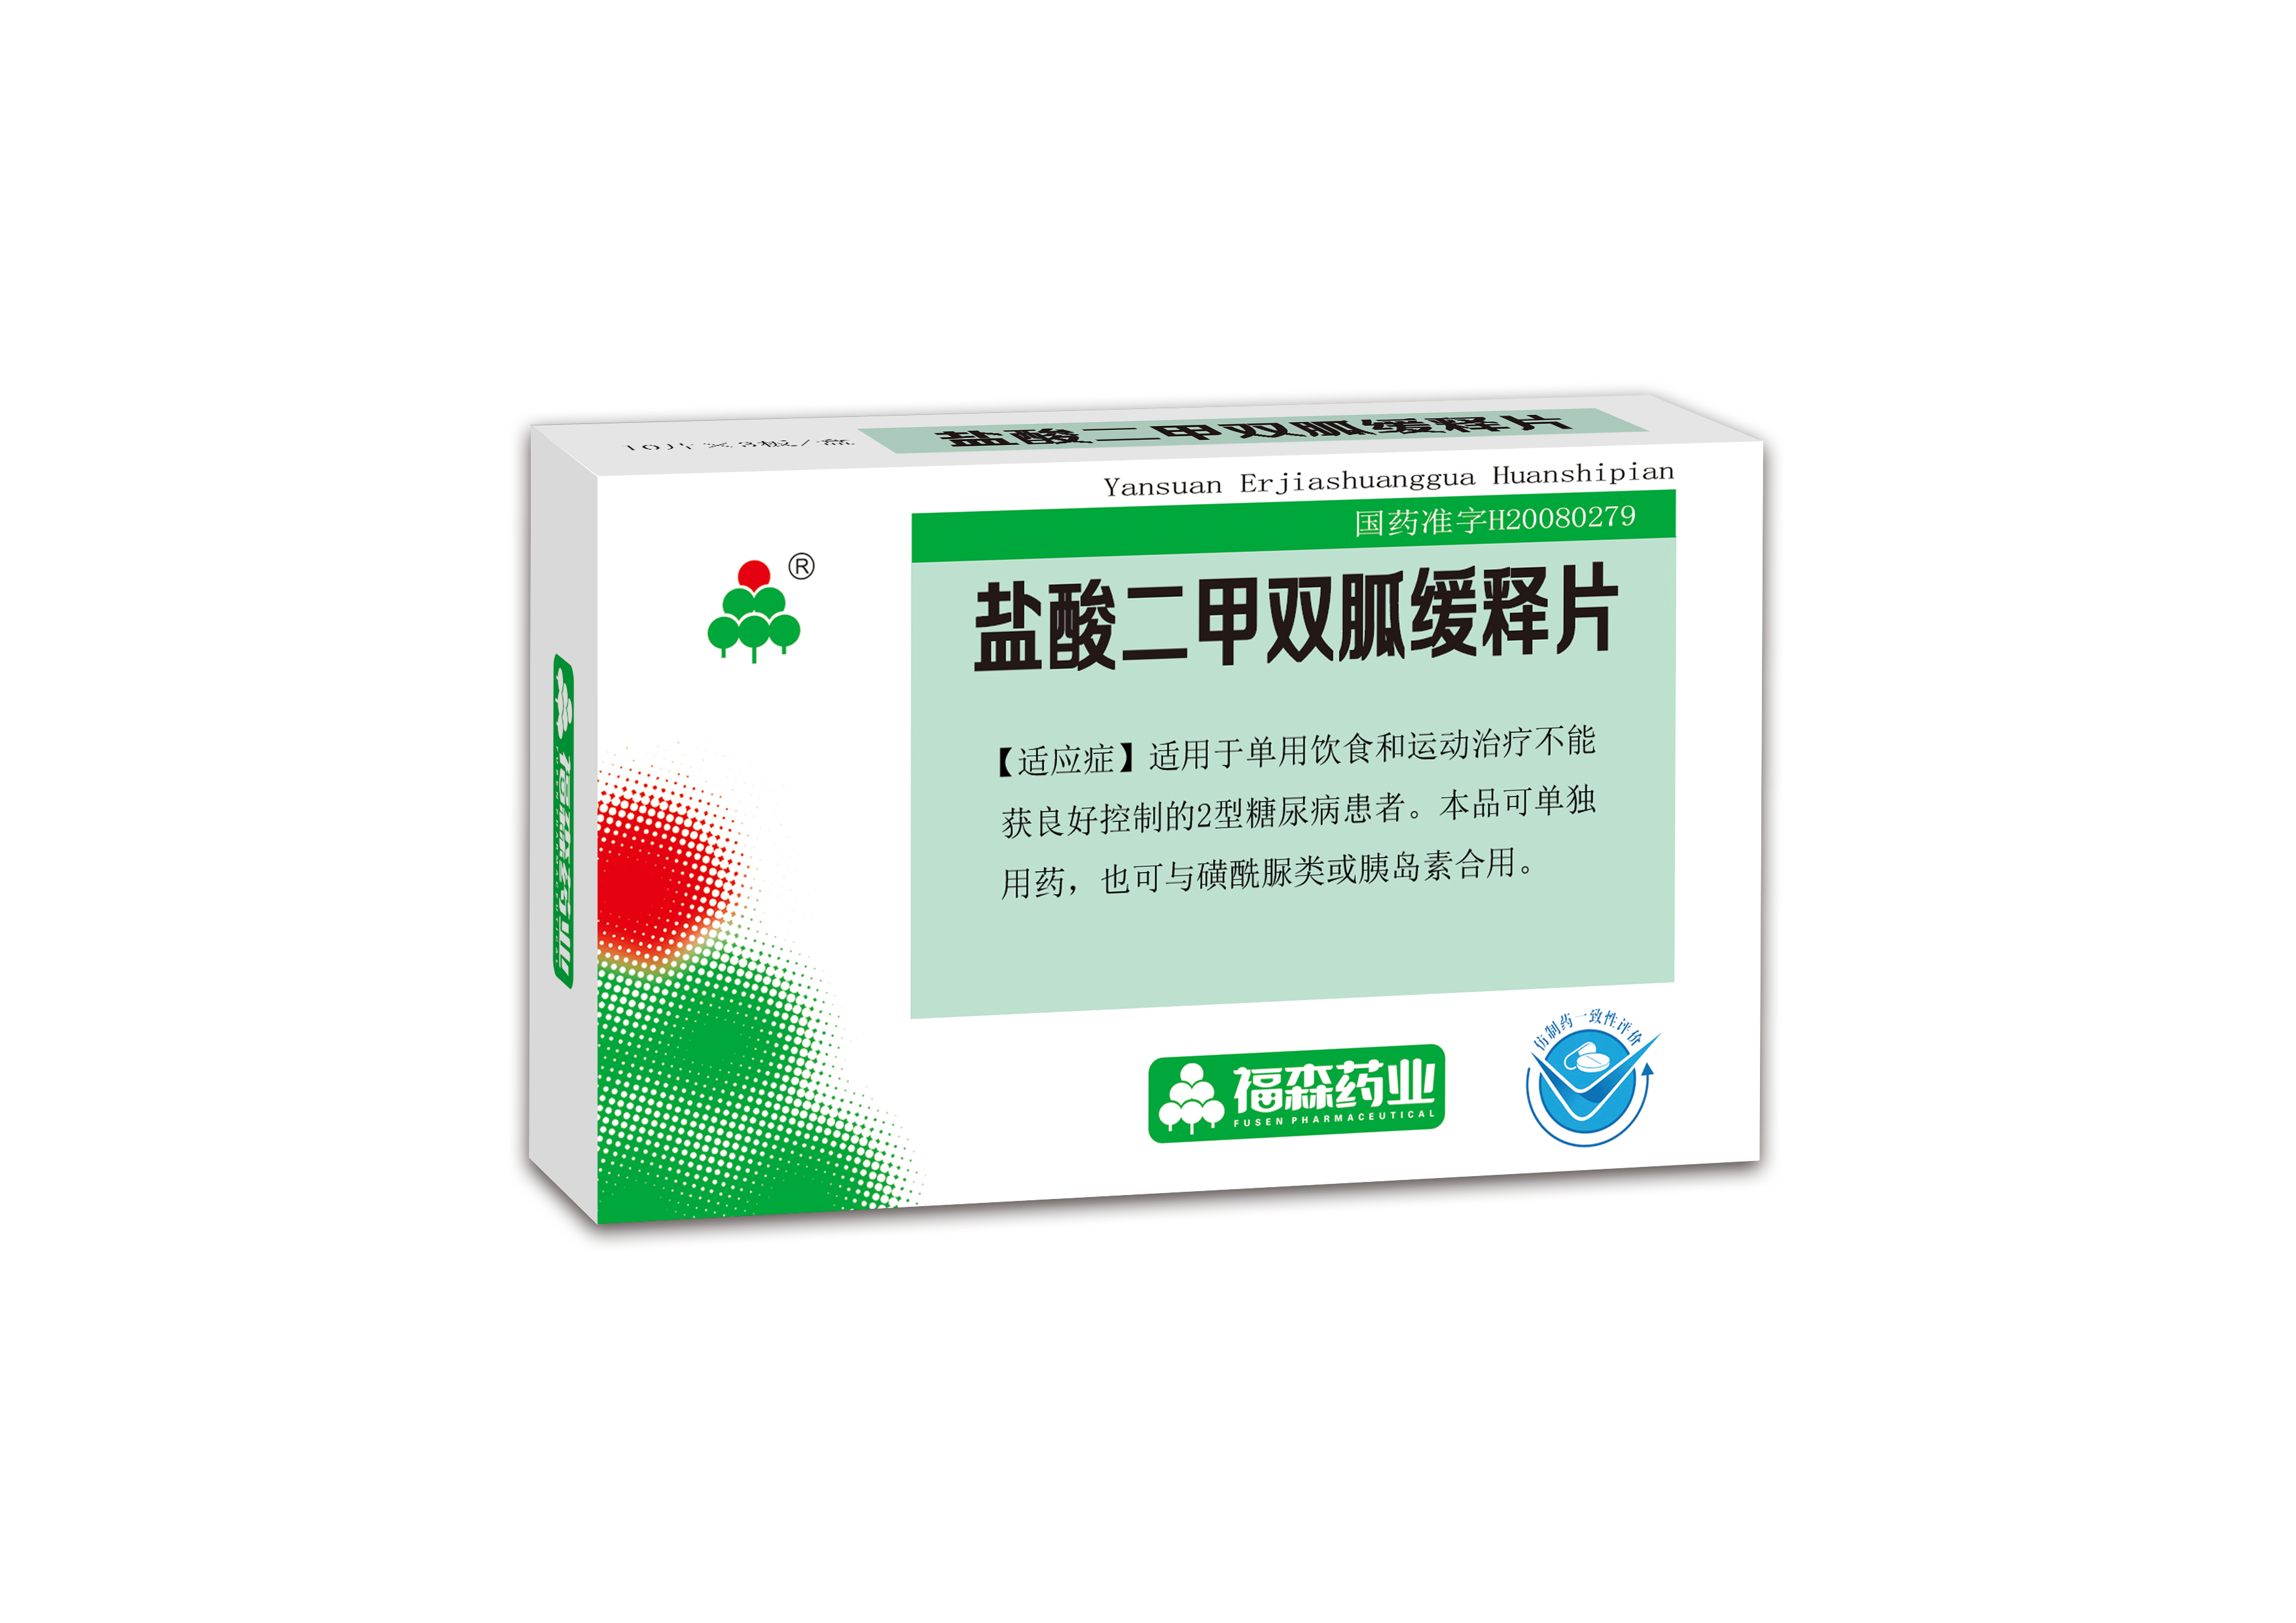 Fusen pharmaceutical: metformin hydrochloride sustained release tablets passed the consistency evaluation